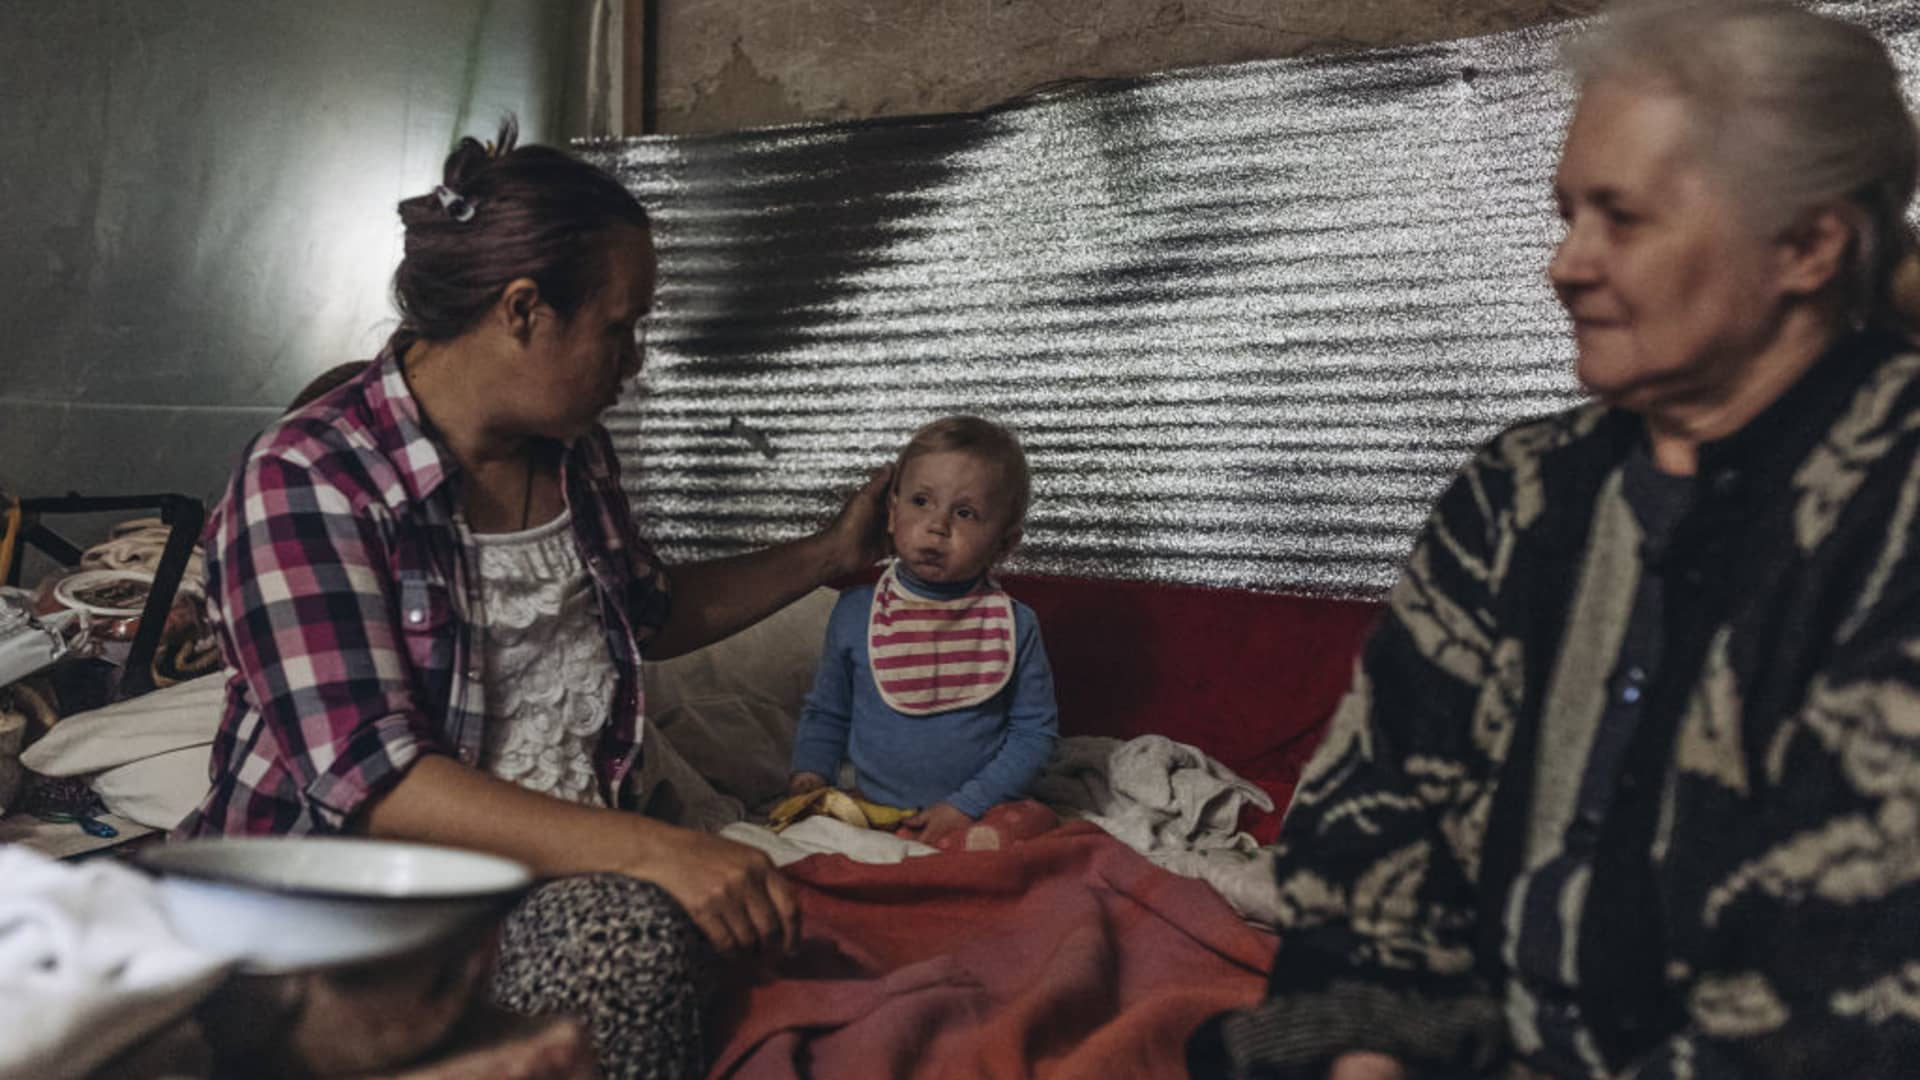 A mother and grandmother give care for a half-year-old child in a basement in Siversk, Donetsk Oblast, Ukraine, on May 31, 2022, as Russian attacks continue.